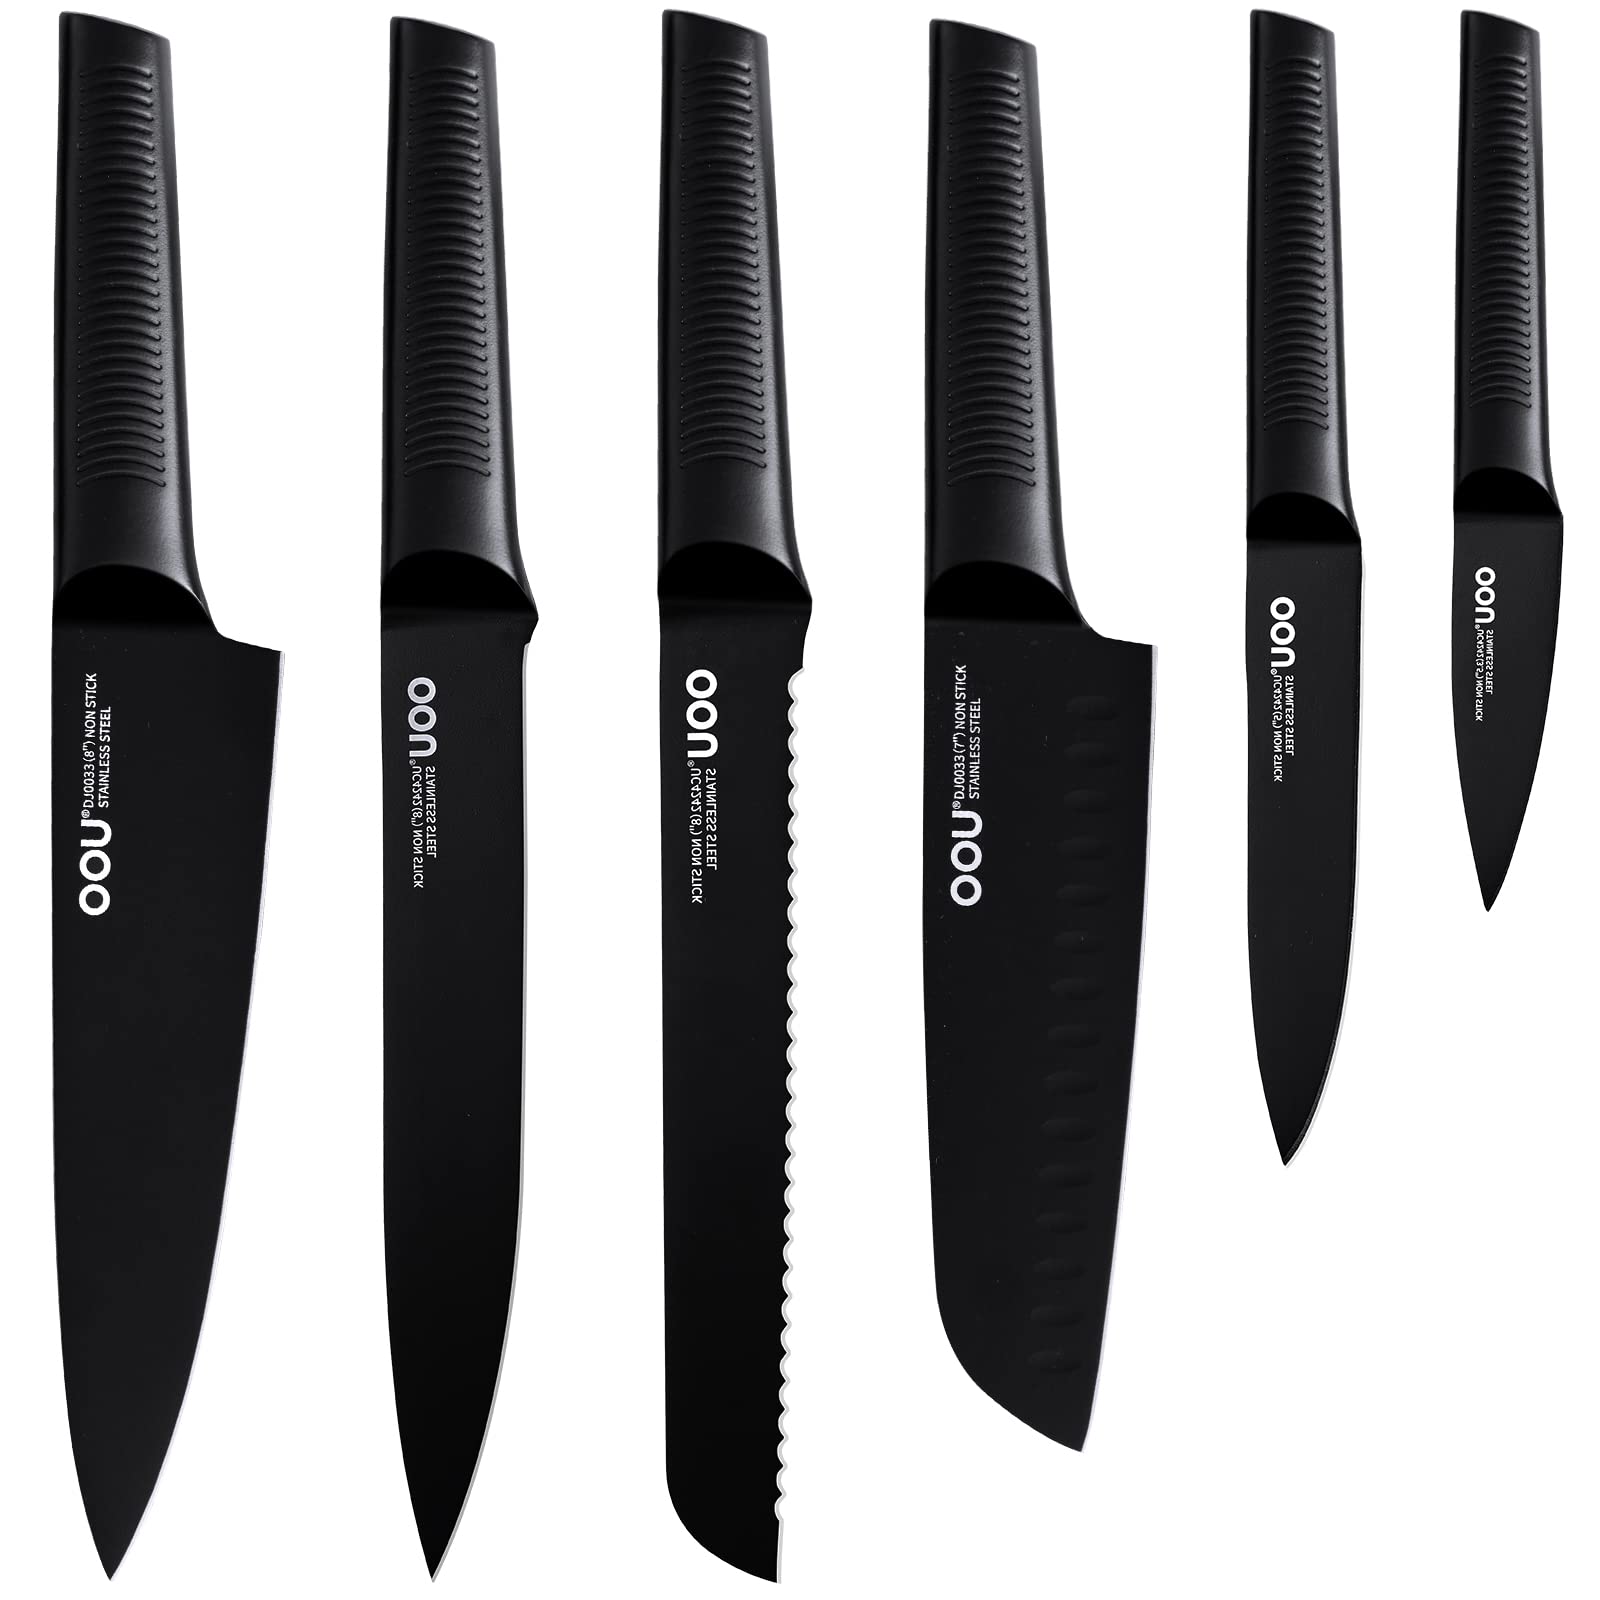 http://ooucn.com/cdn/shop/products/OOUKitchenKnifeSet-15PiecesHighCarbonStainlessSteelChefKni.jpg?v=1663385728